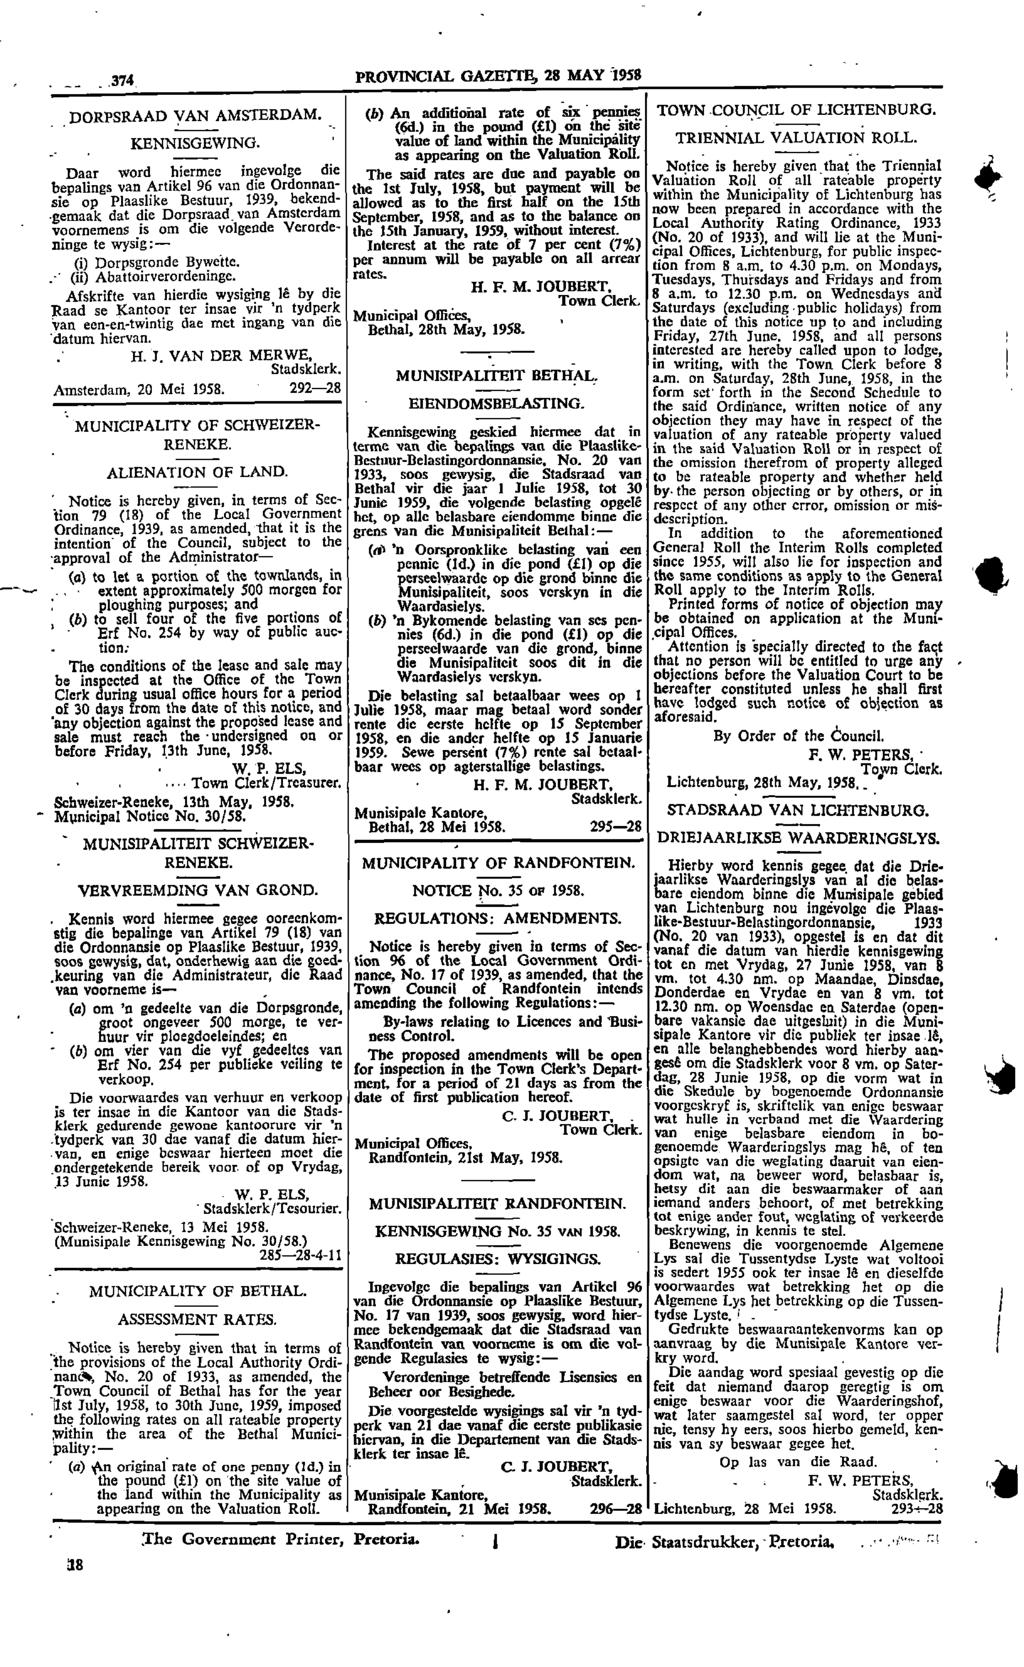 374 PROVINCIAL GAZETTE 28 MAY 1958 DORPSRAAD VAN AMSTERDAM (b) An additional rate of six pennies TOWN COUNCIL OF LICHTENBURG (6d) in the pound (LI) on the site" ICENNISGEWING value of land within the